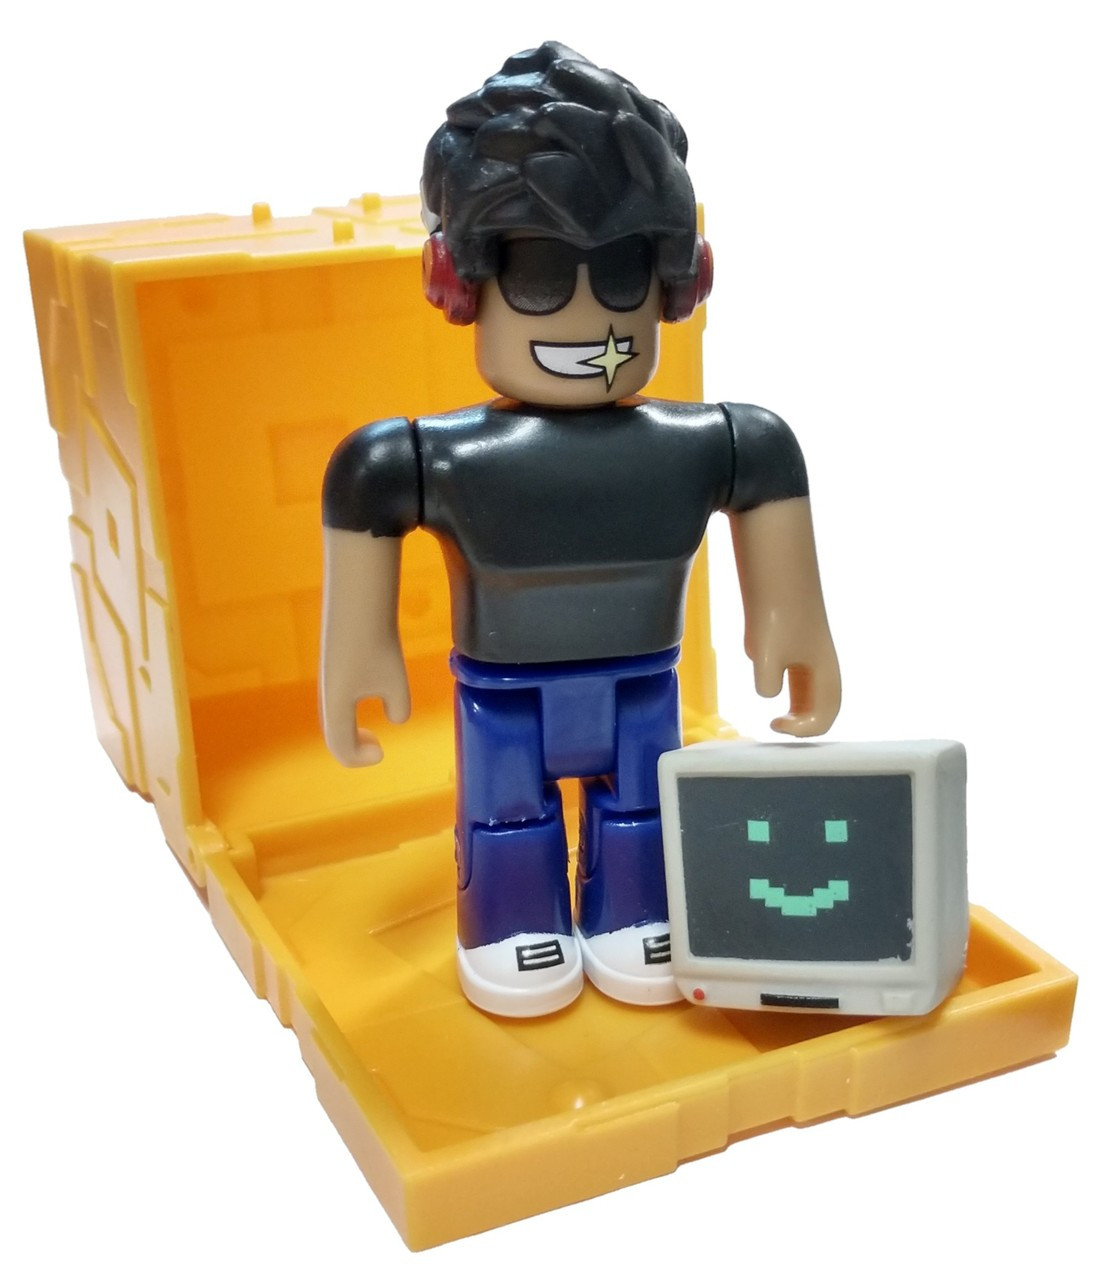 Roblox Series 5 Simbuilder 3 Mini Figure With Gold Cube And Online Code Loose Jazwares Toywiz - roblox shopping simulator where is bobbys toy